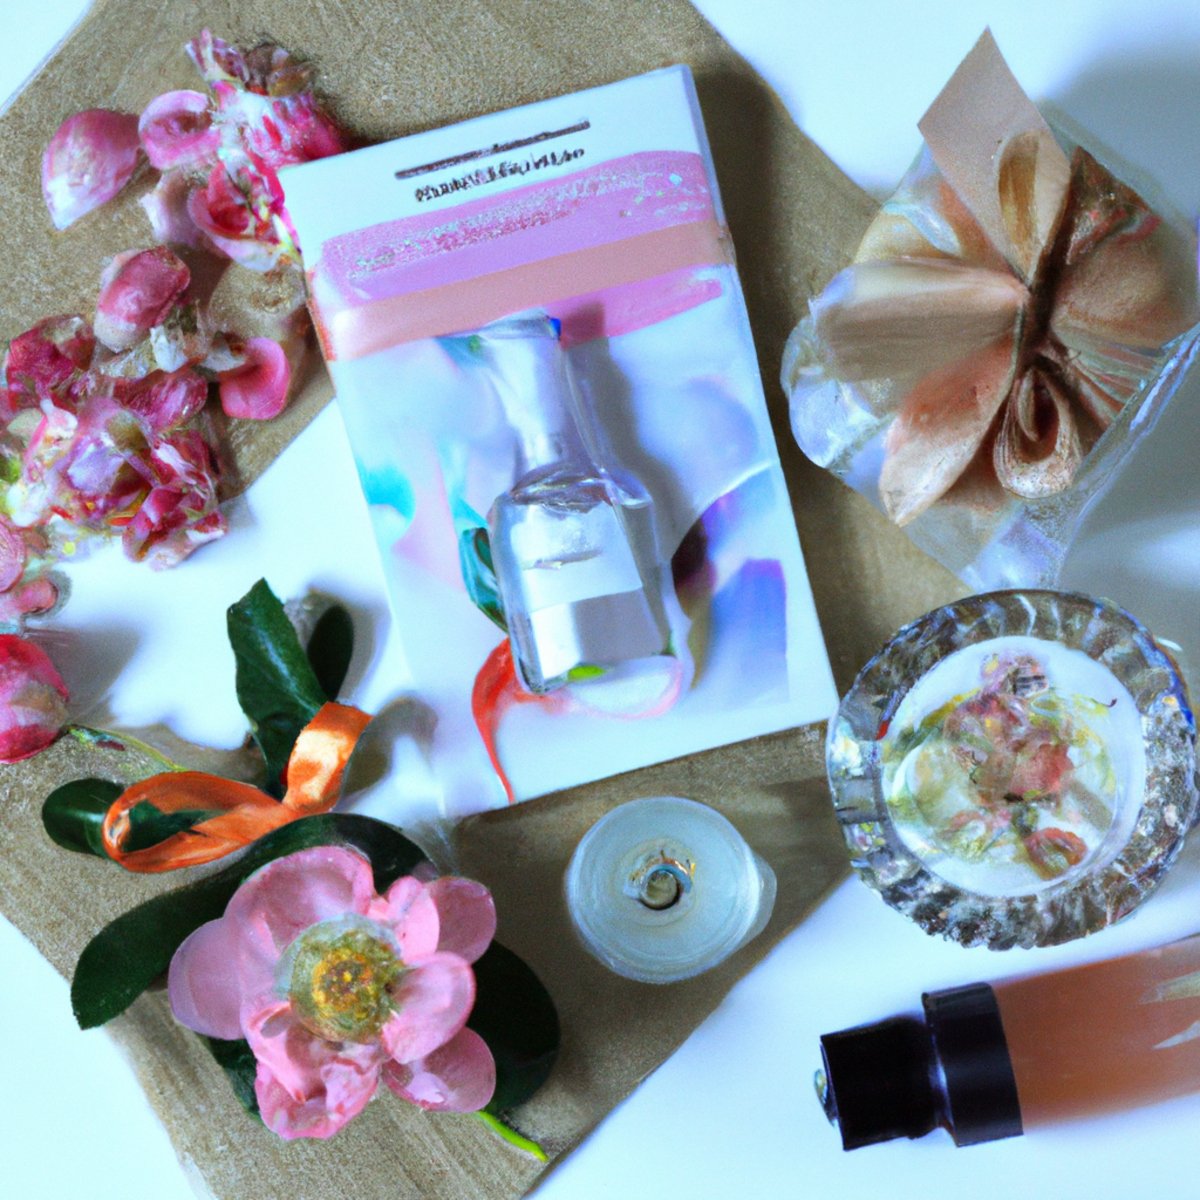 Vibrant bouquet of flowers and skincare products symbolize clean beauty and natural skincare movement.